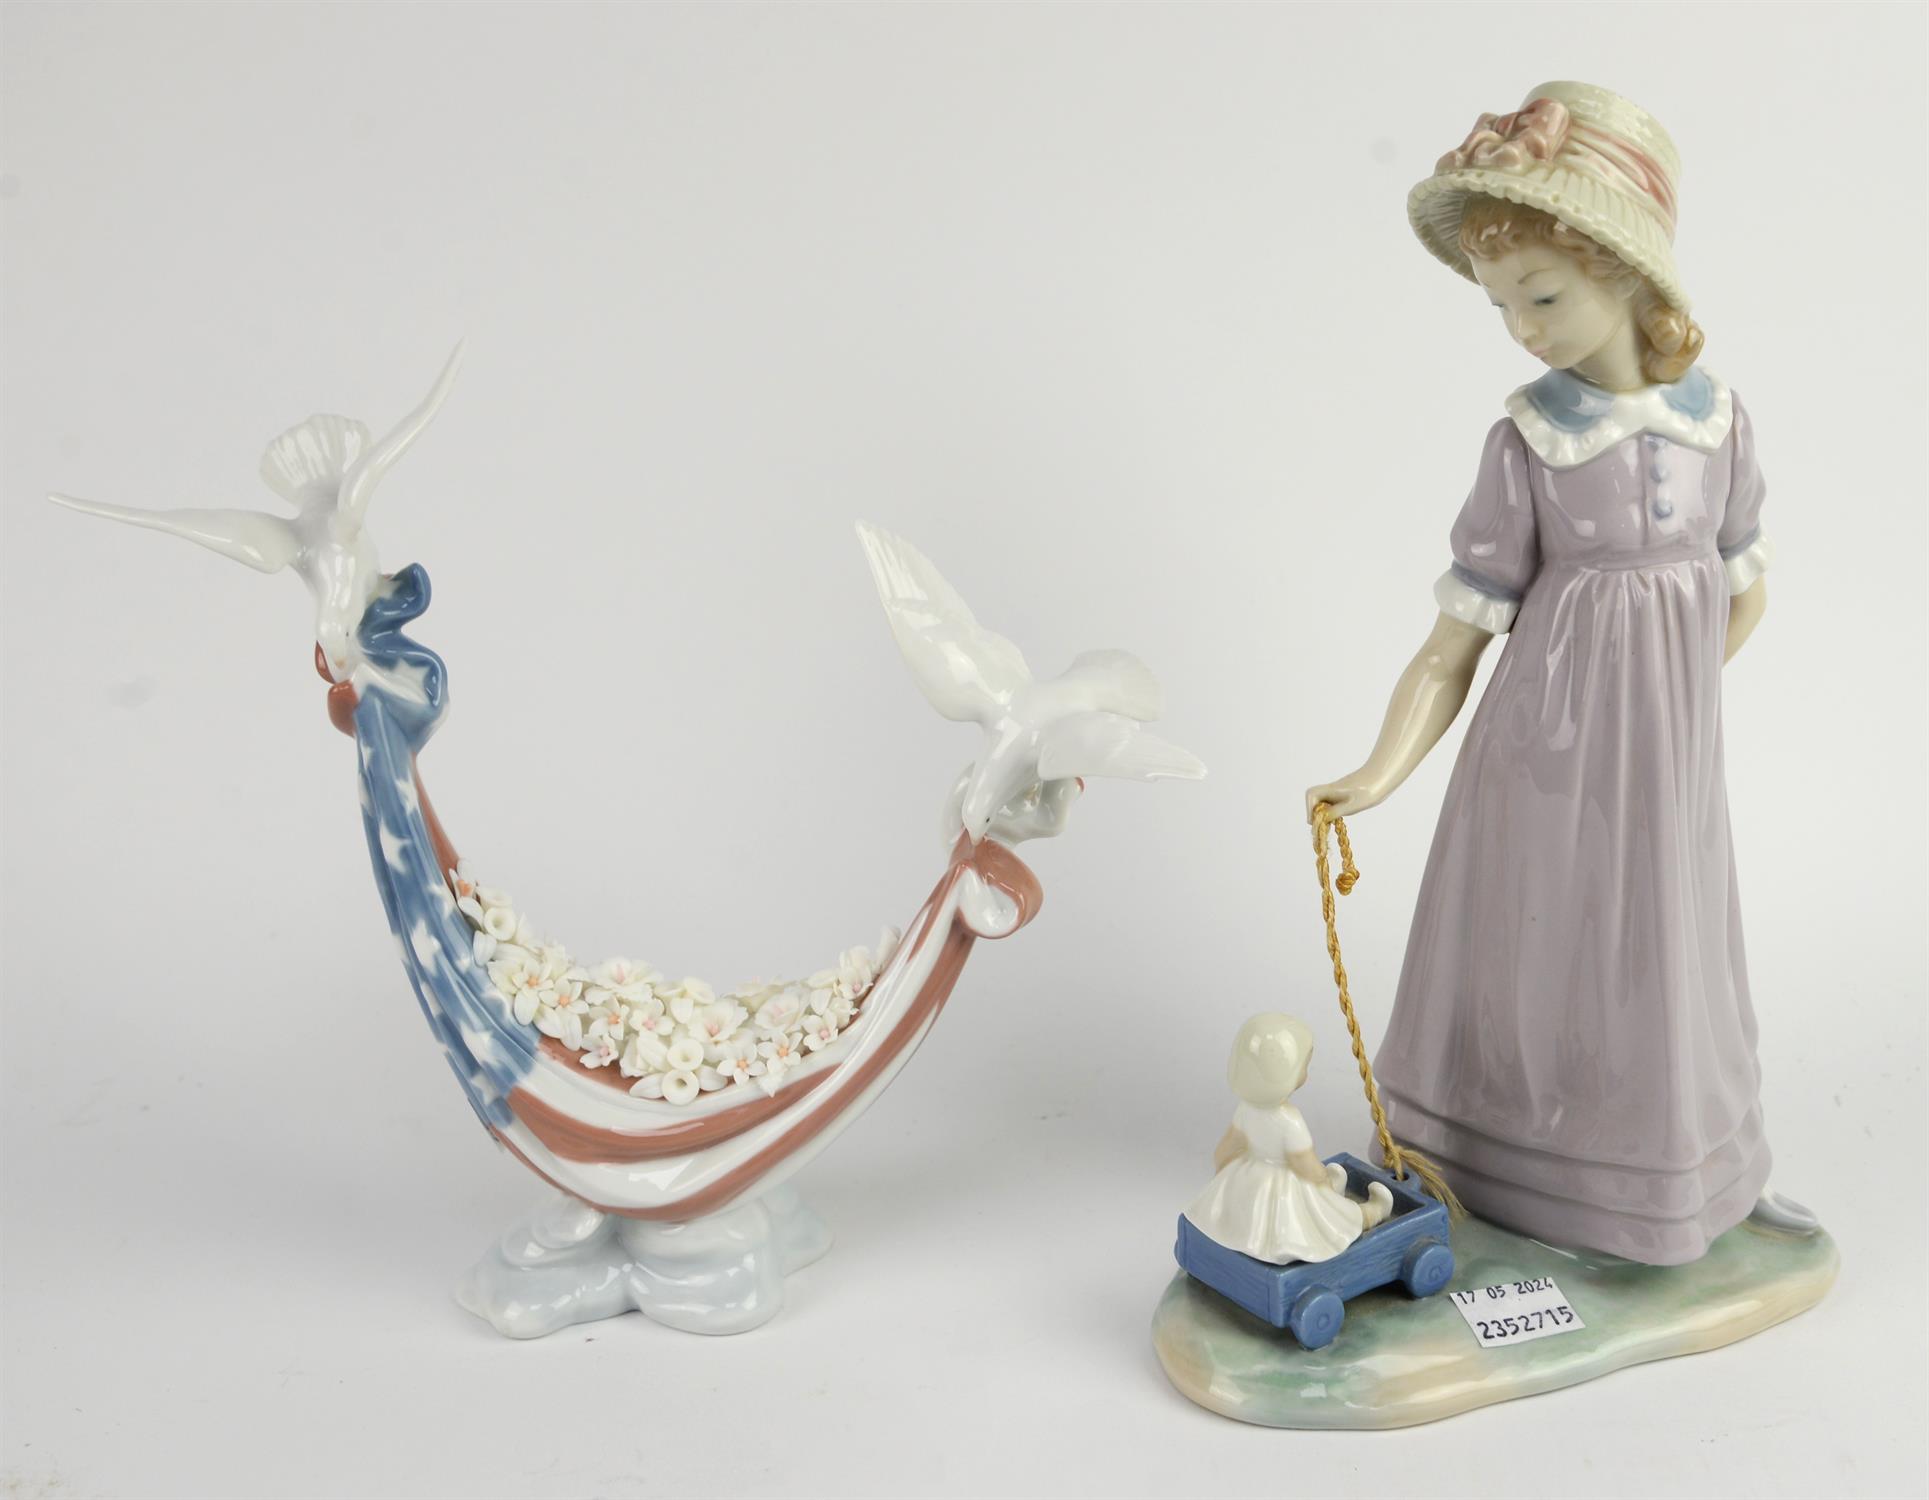 A Llladro porcelain figure depicting a young girl pulling a toy wagon, No 5044 and one further